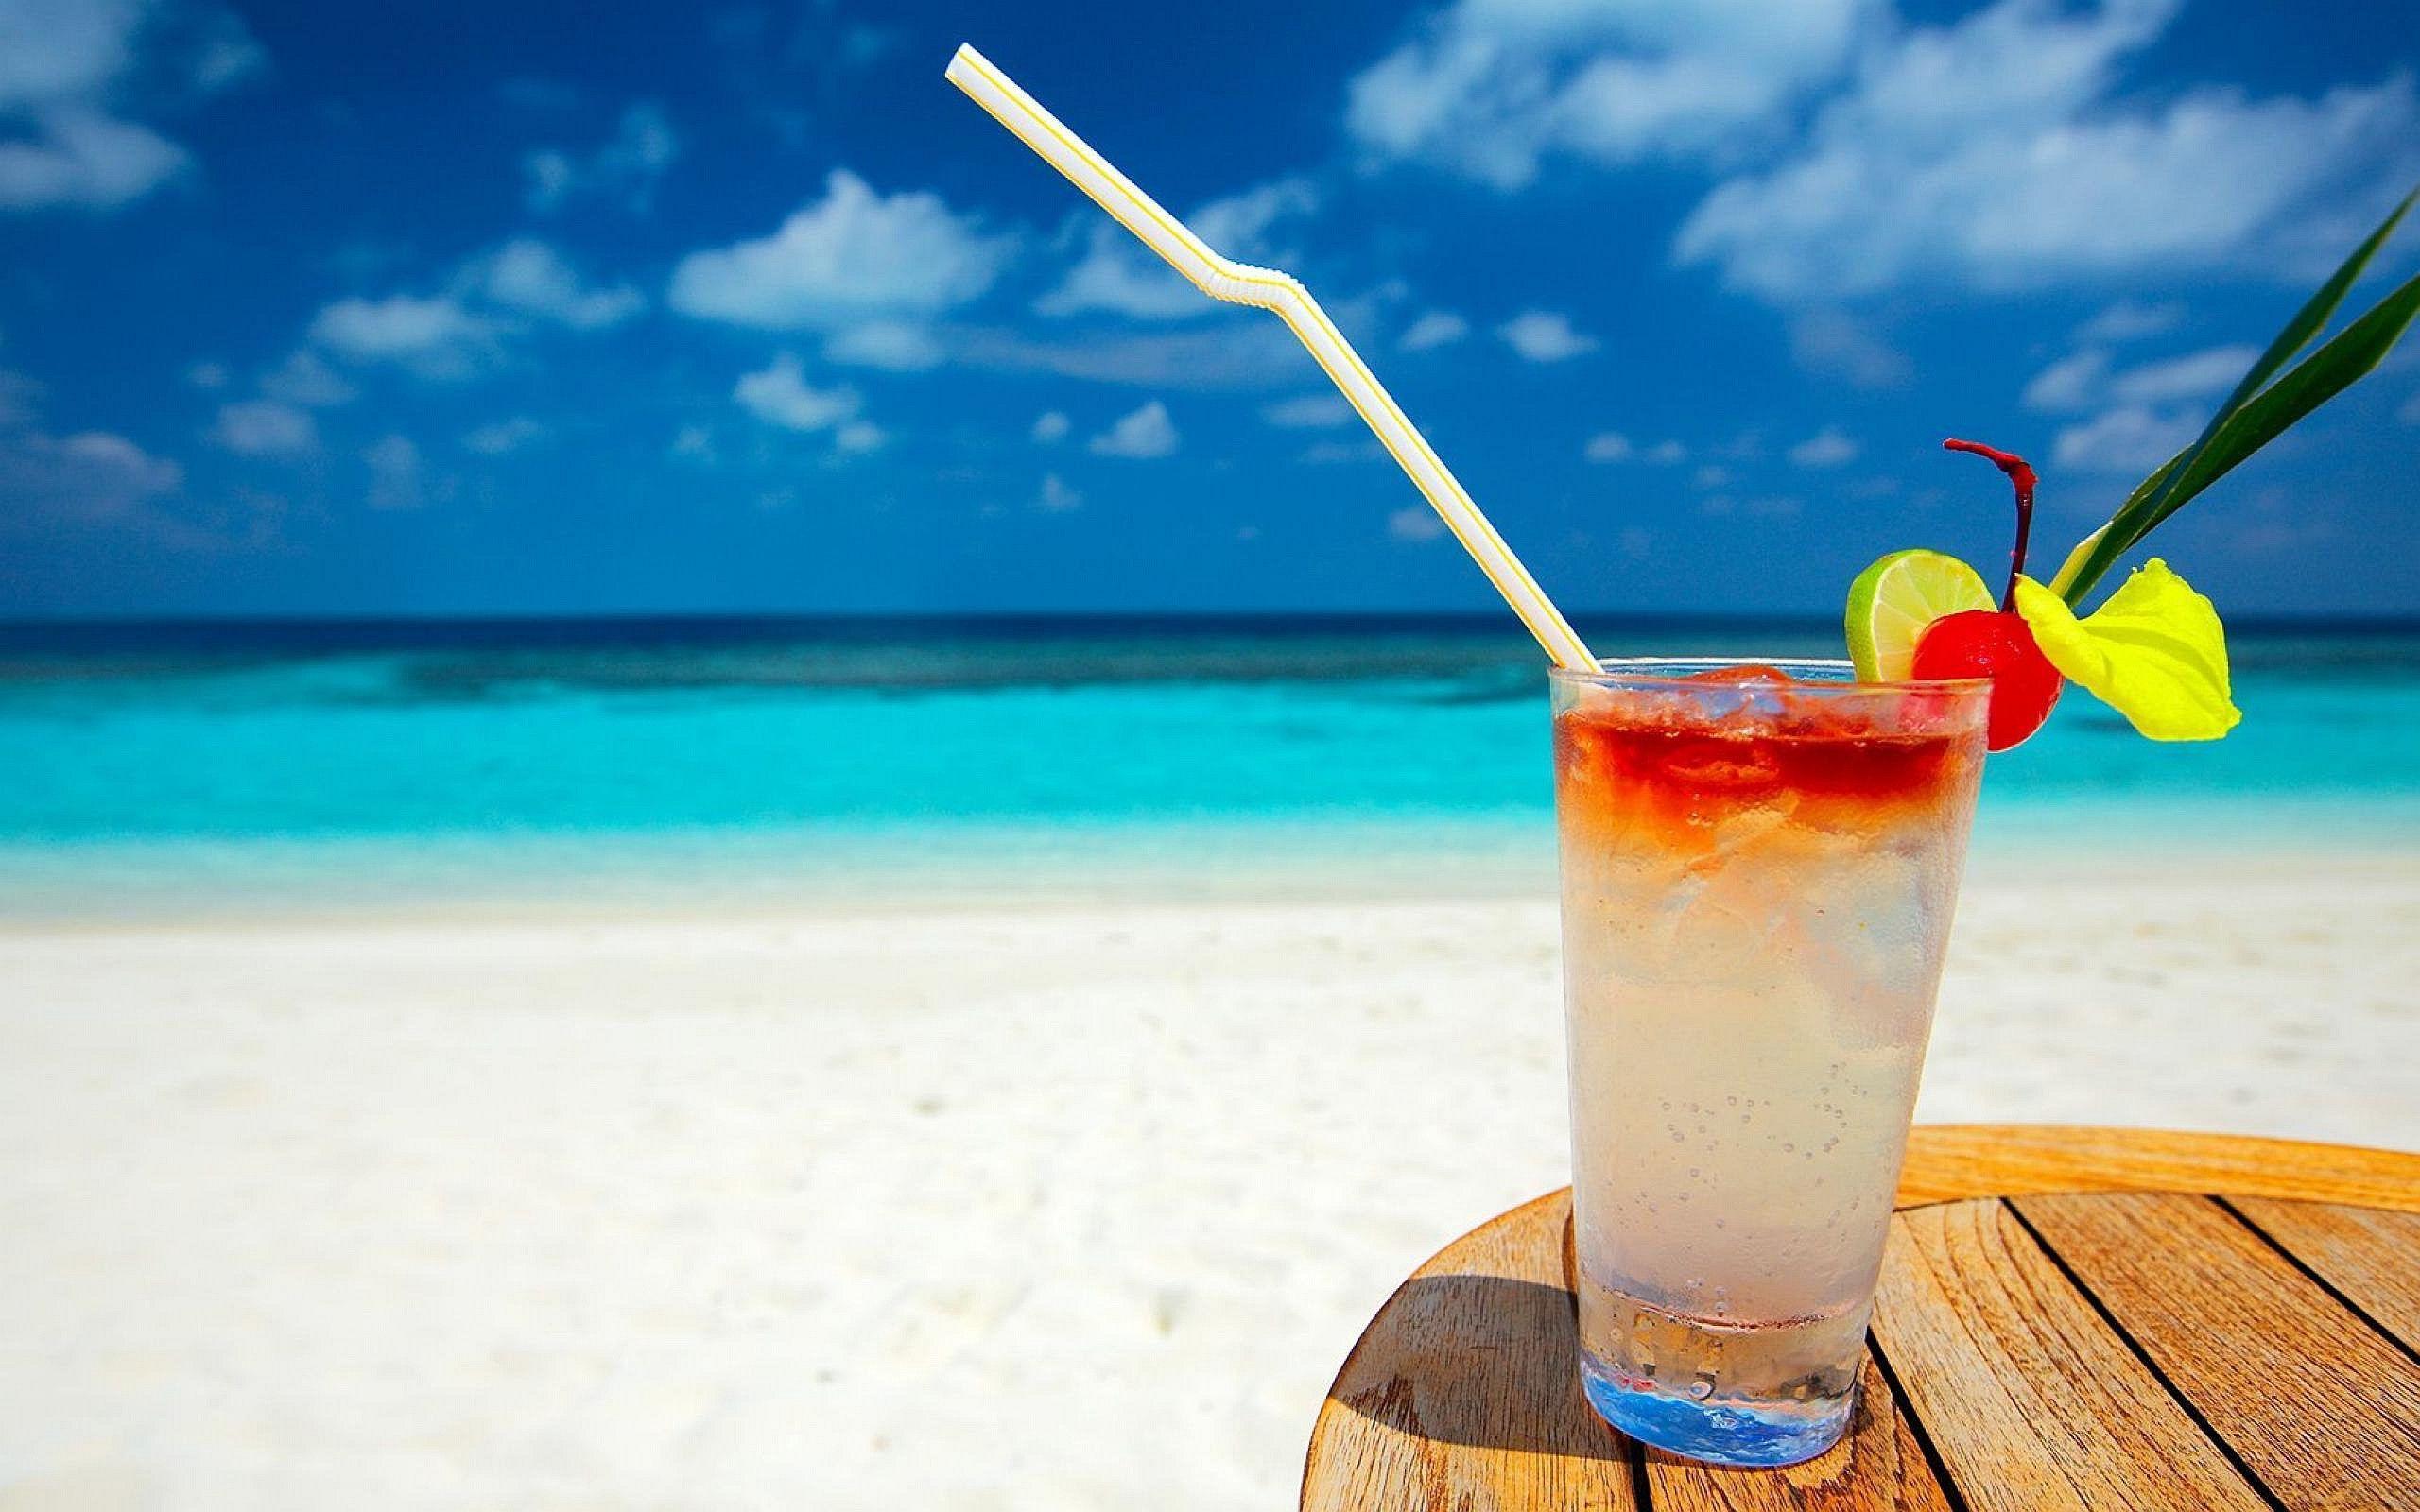 Cocktails on The Beach Wallpaper